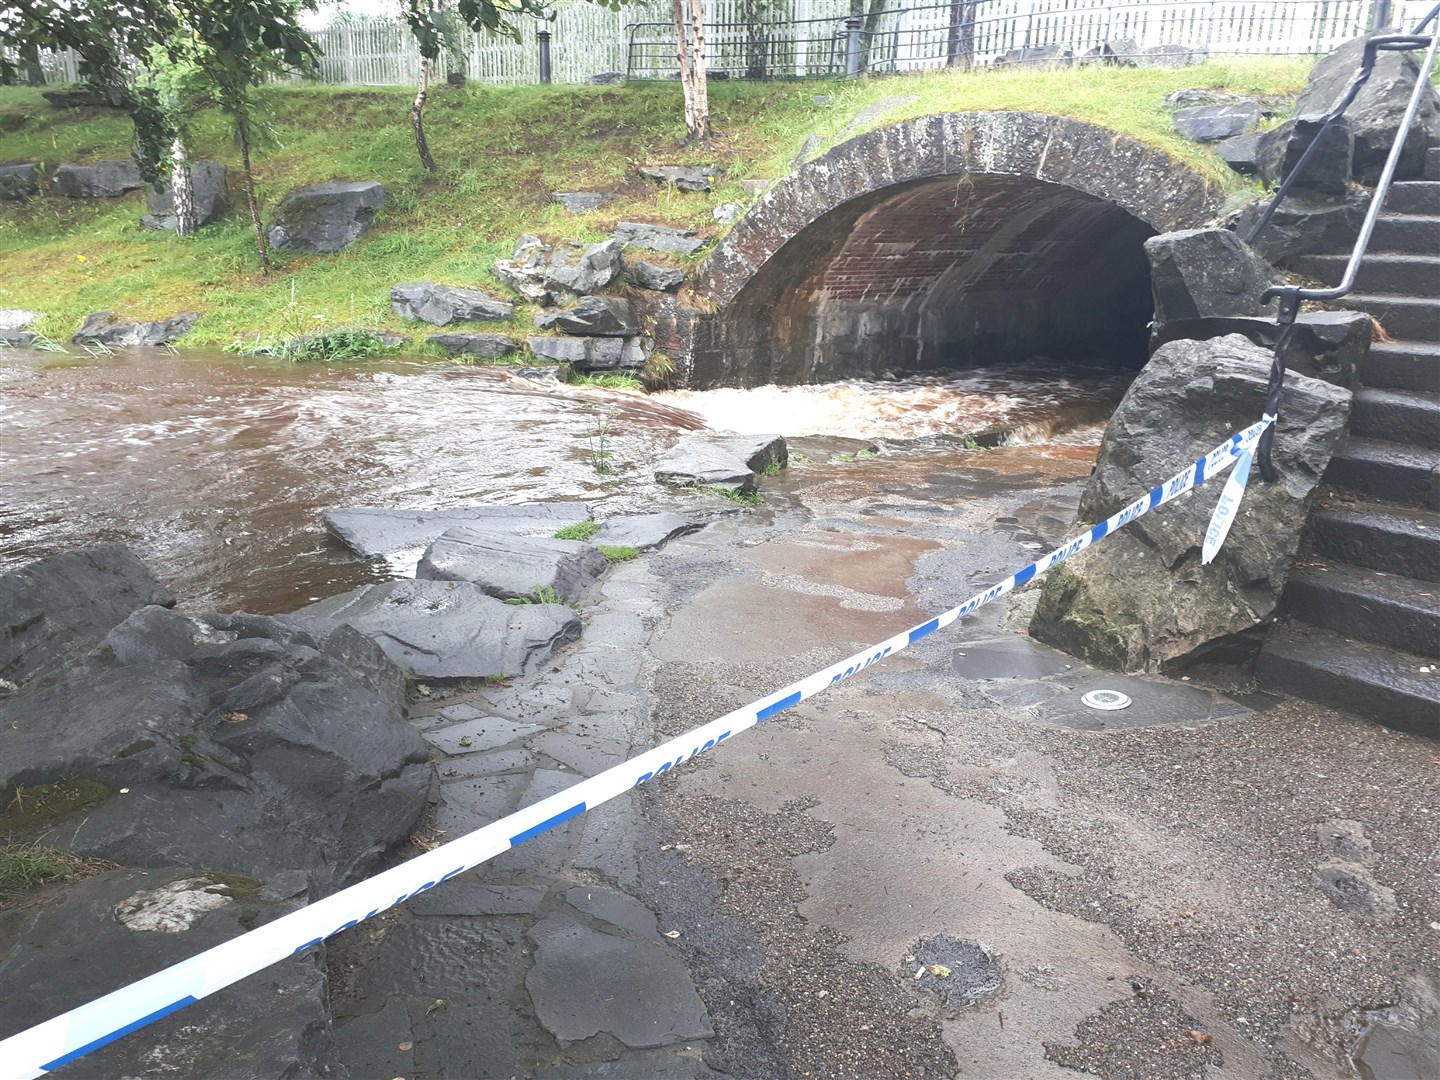 Police cordoned off the Butcher's Burn tunnel in Aviemore